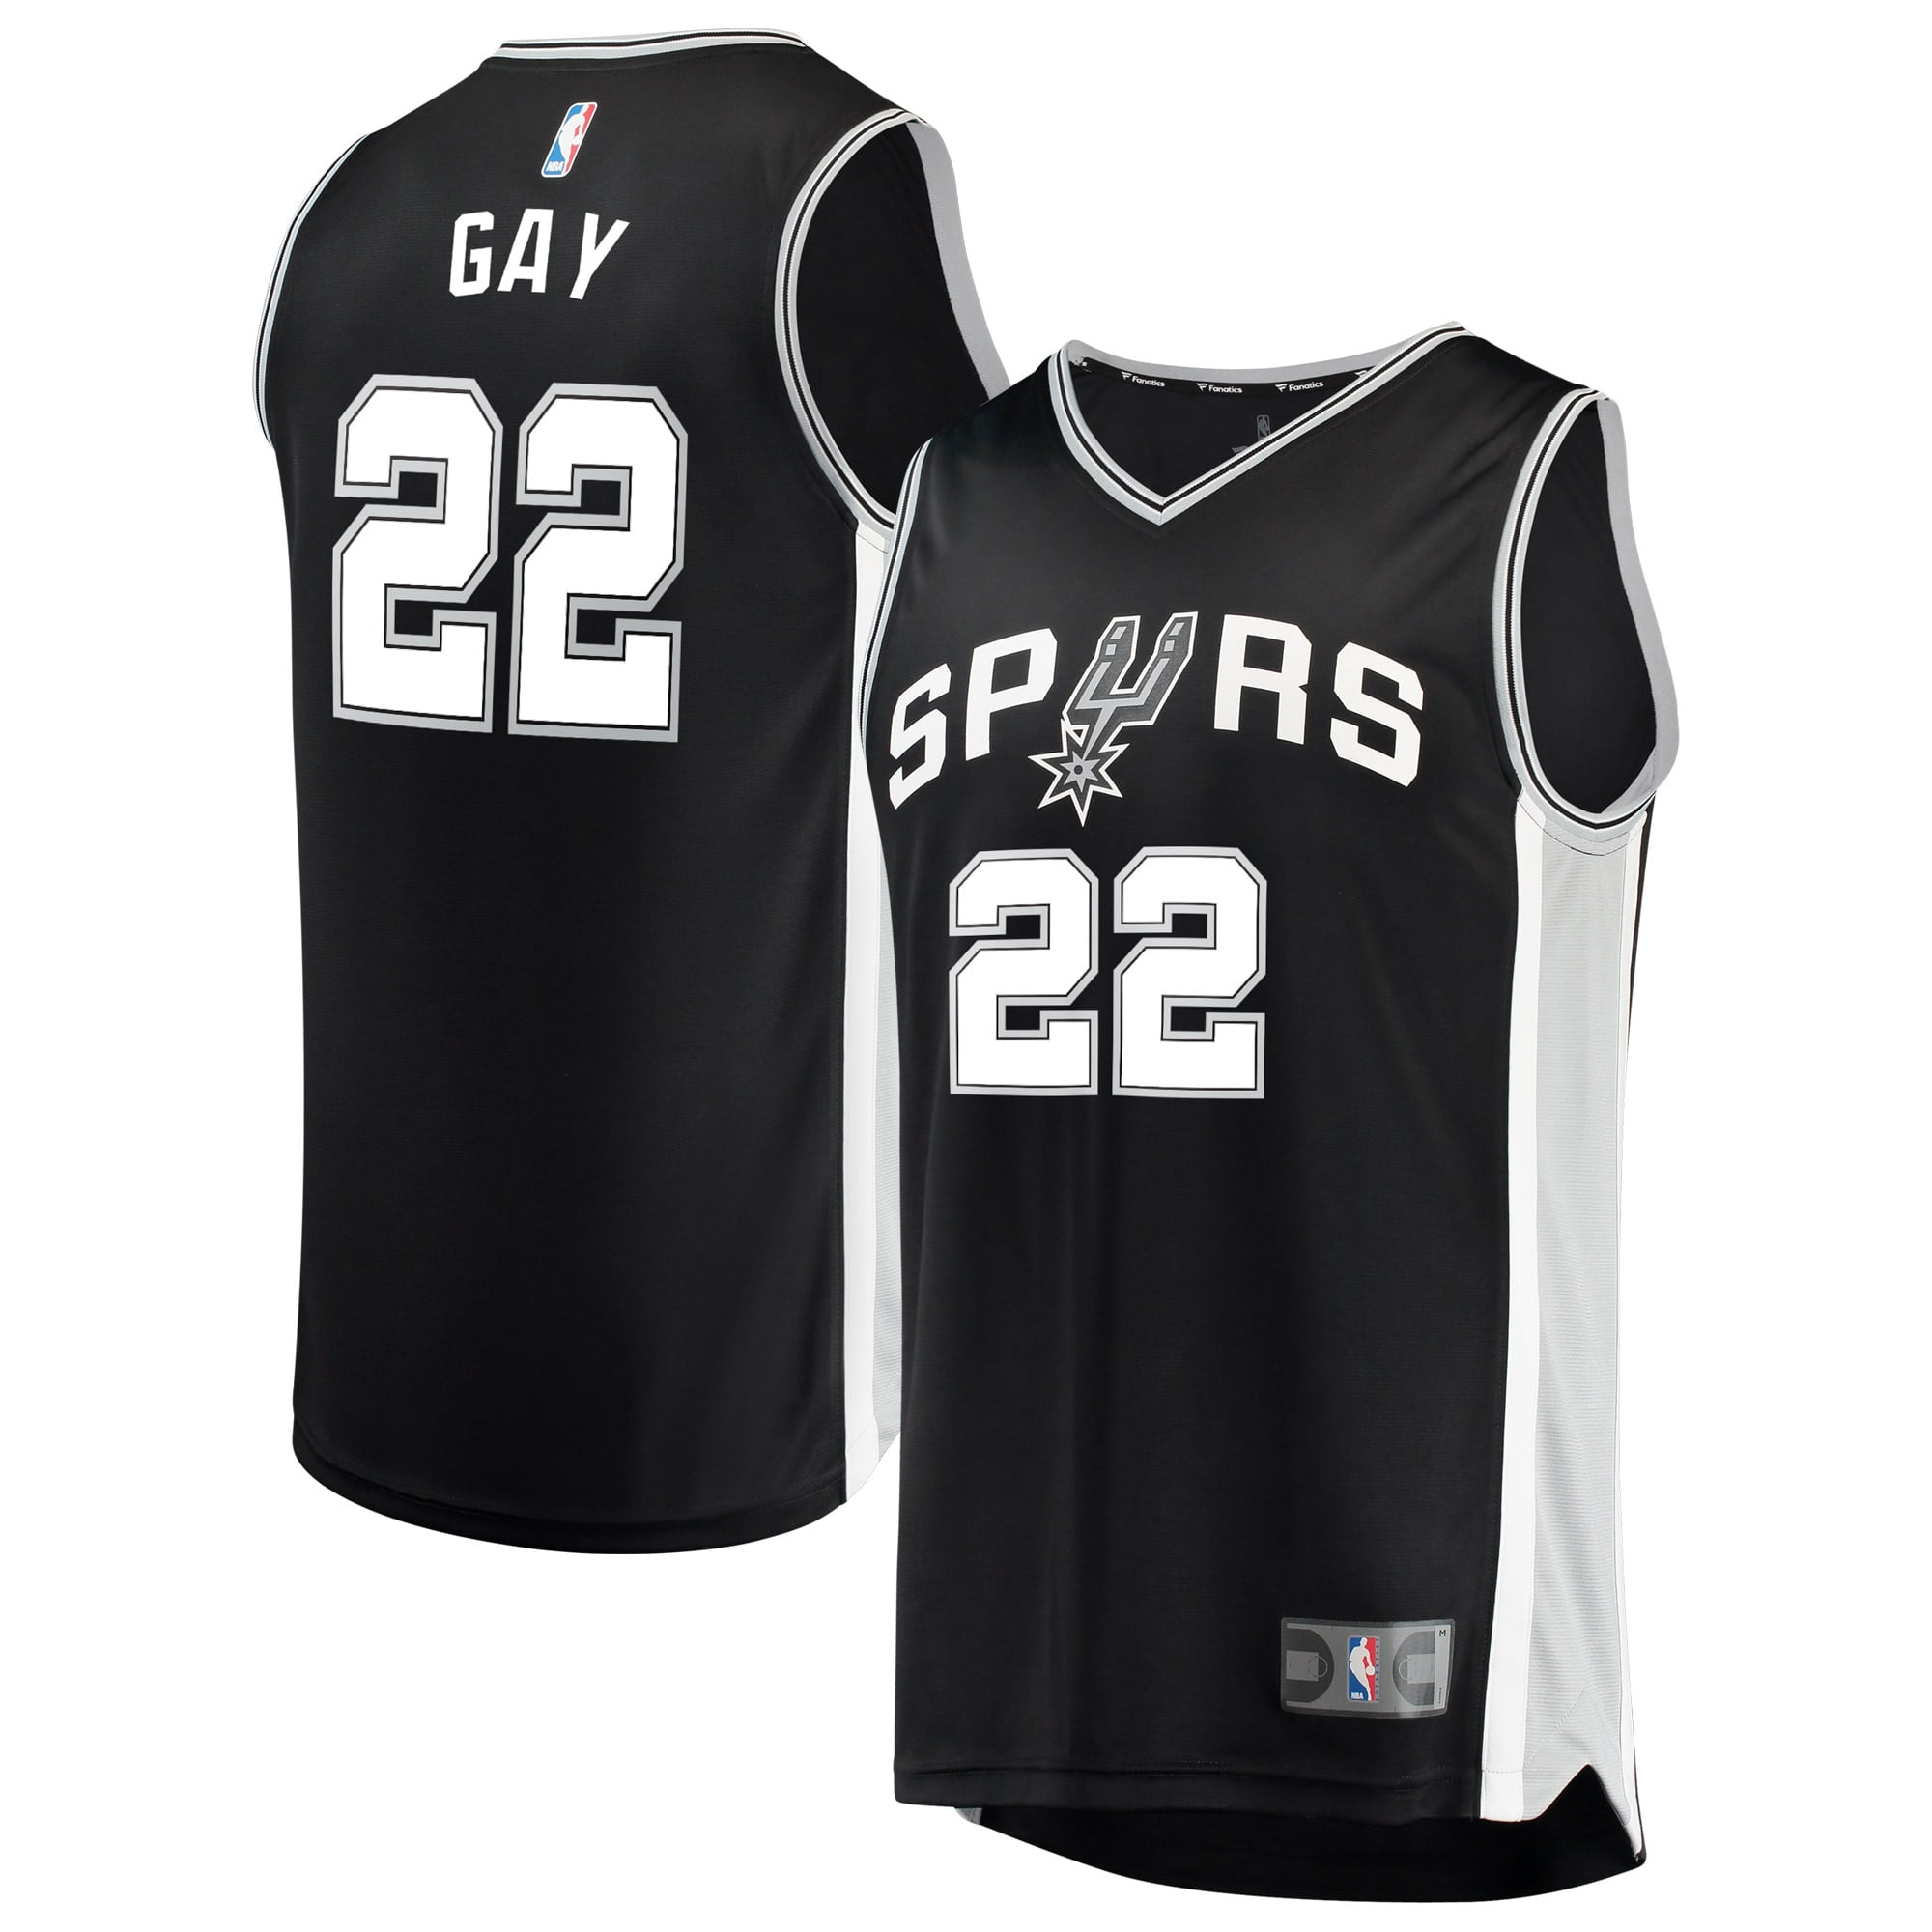 rudy gay spurs